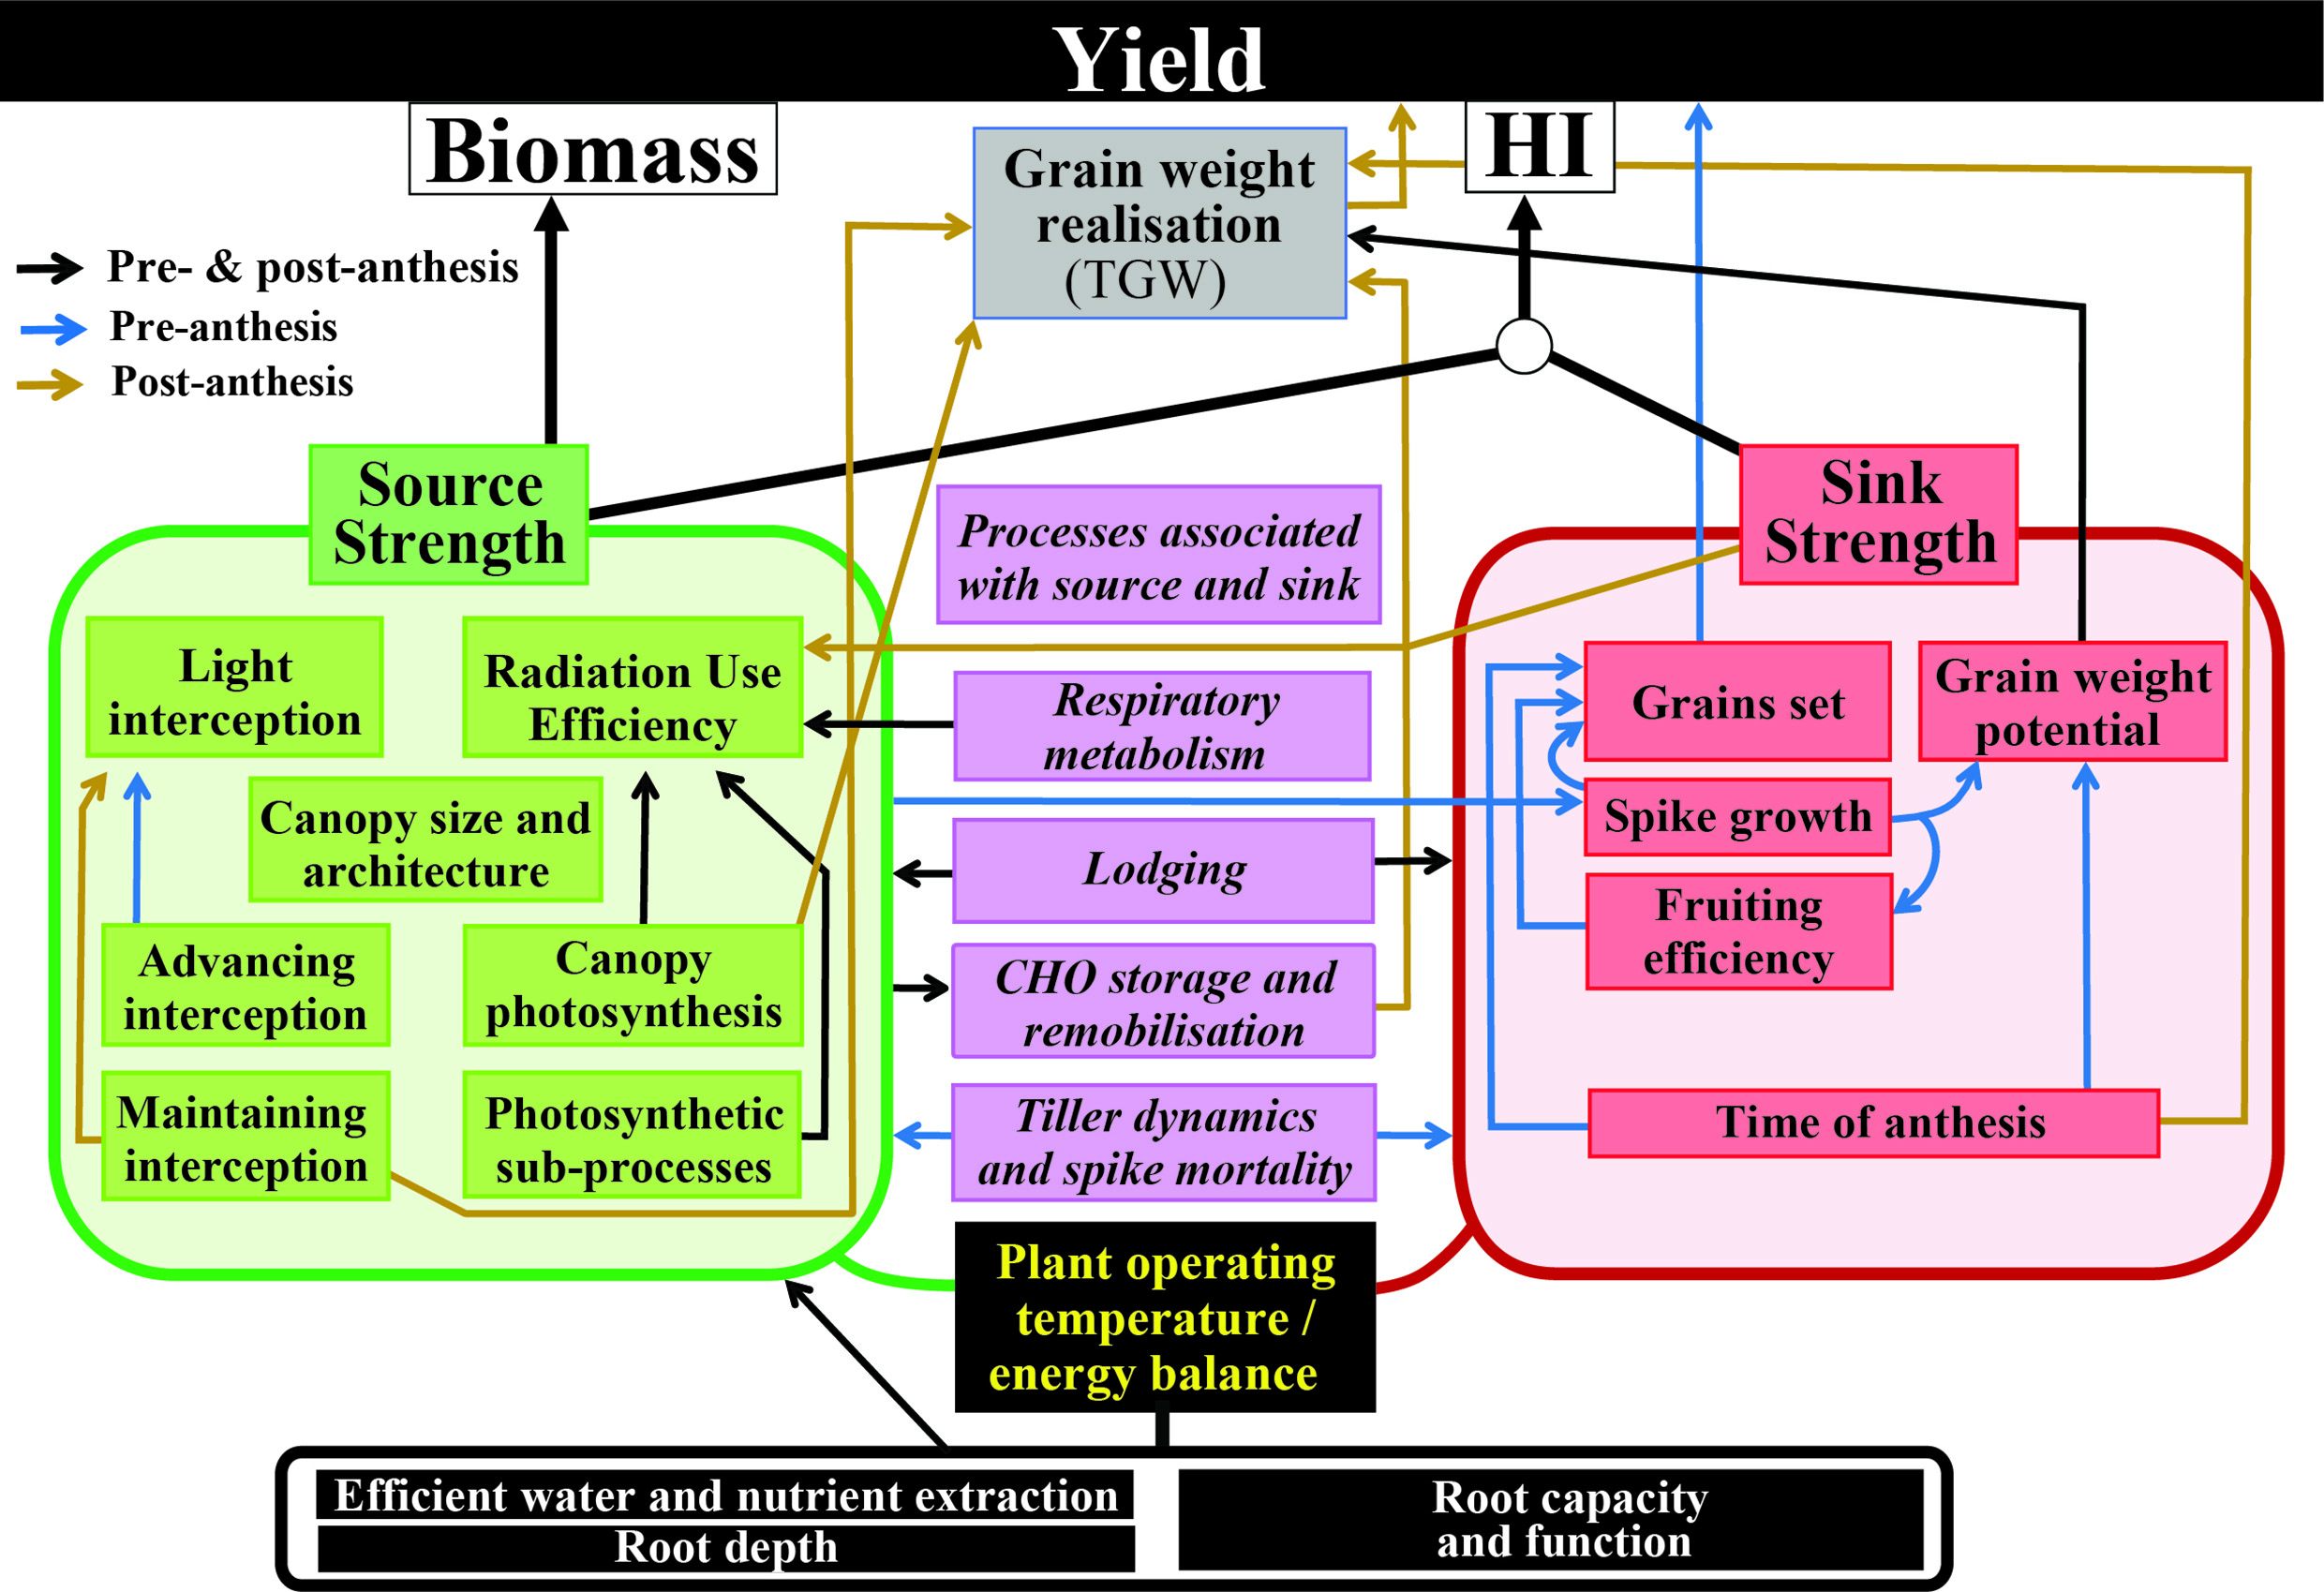 A generalized wiring diagram for wheat, as proposed by the authors. The diagram depicts the traits most commonly associated with the source (left) and sink (right) strengths and others that impact both the sink and source, largely dependent on growth stage (middle). TGW, thousand grain weight.